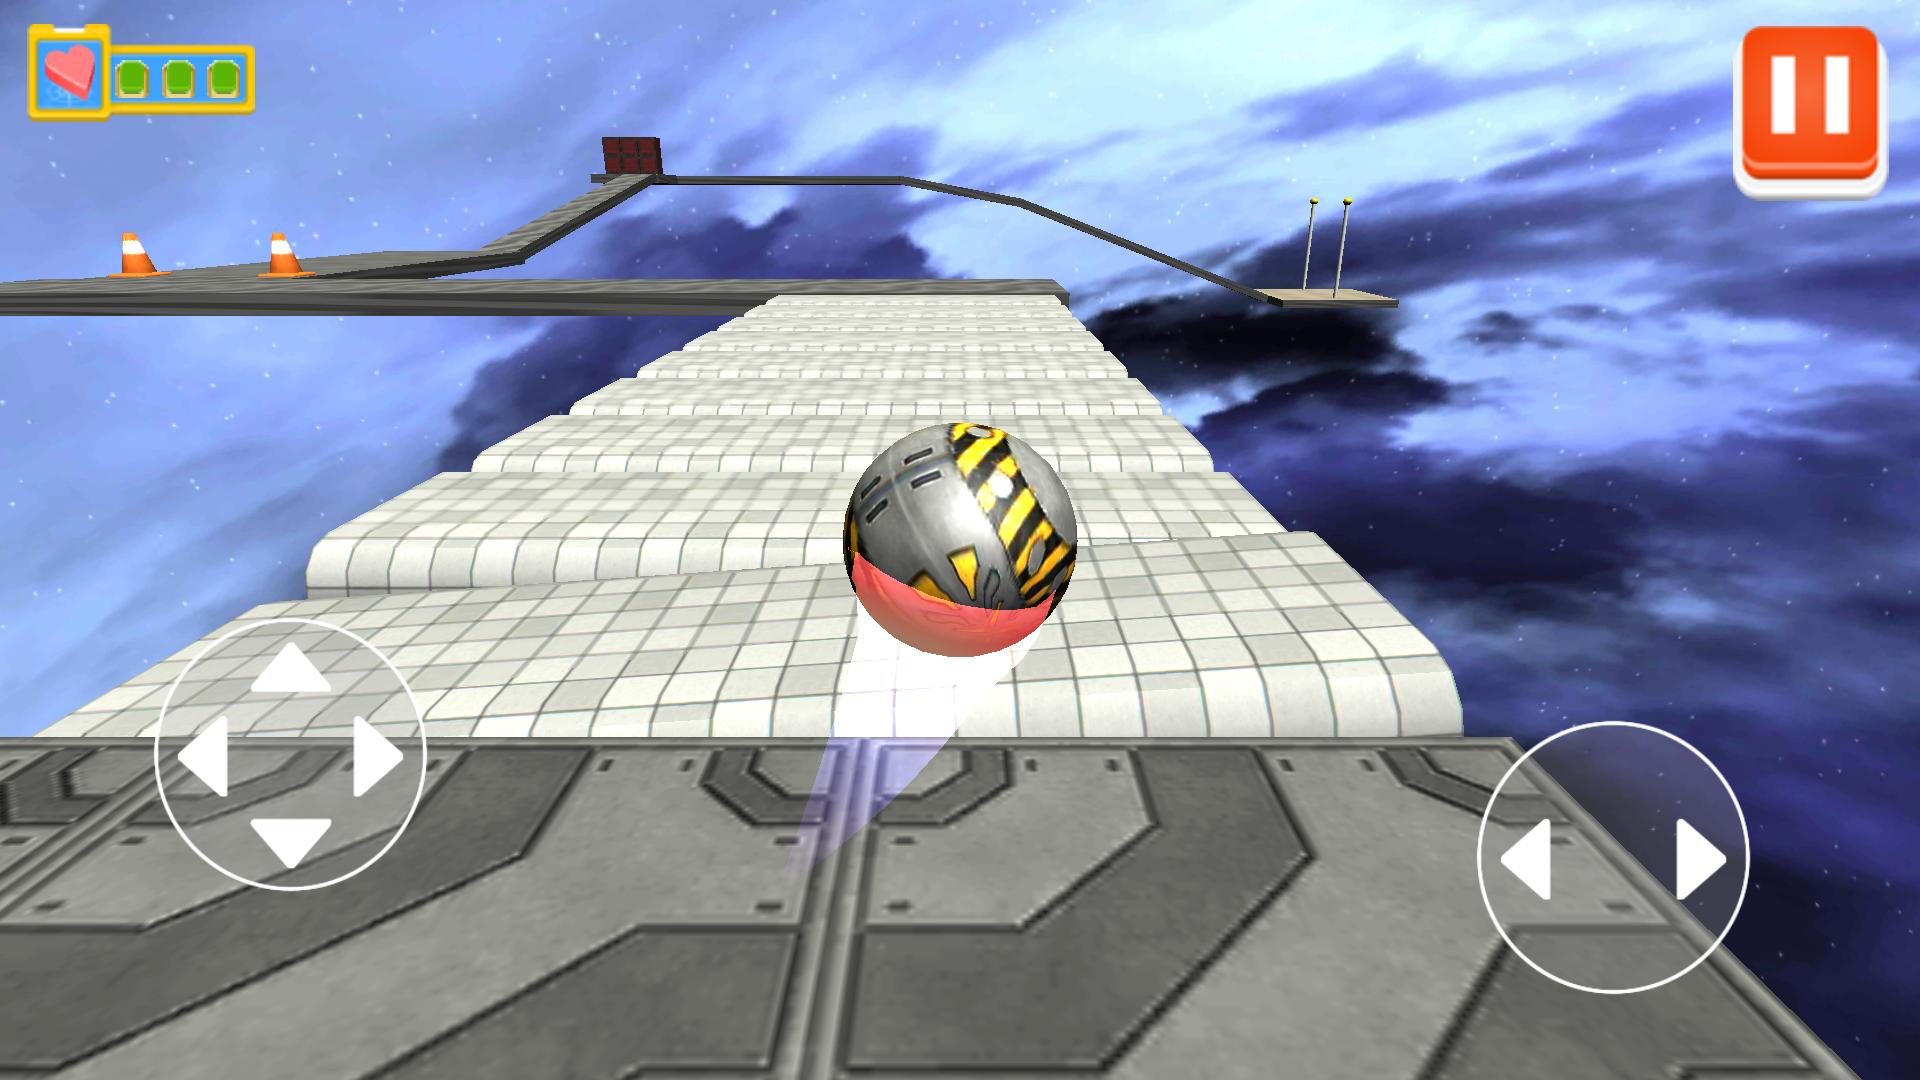 Gyro Ball for Android - APK Download